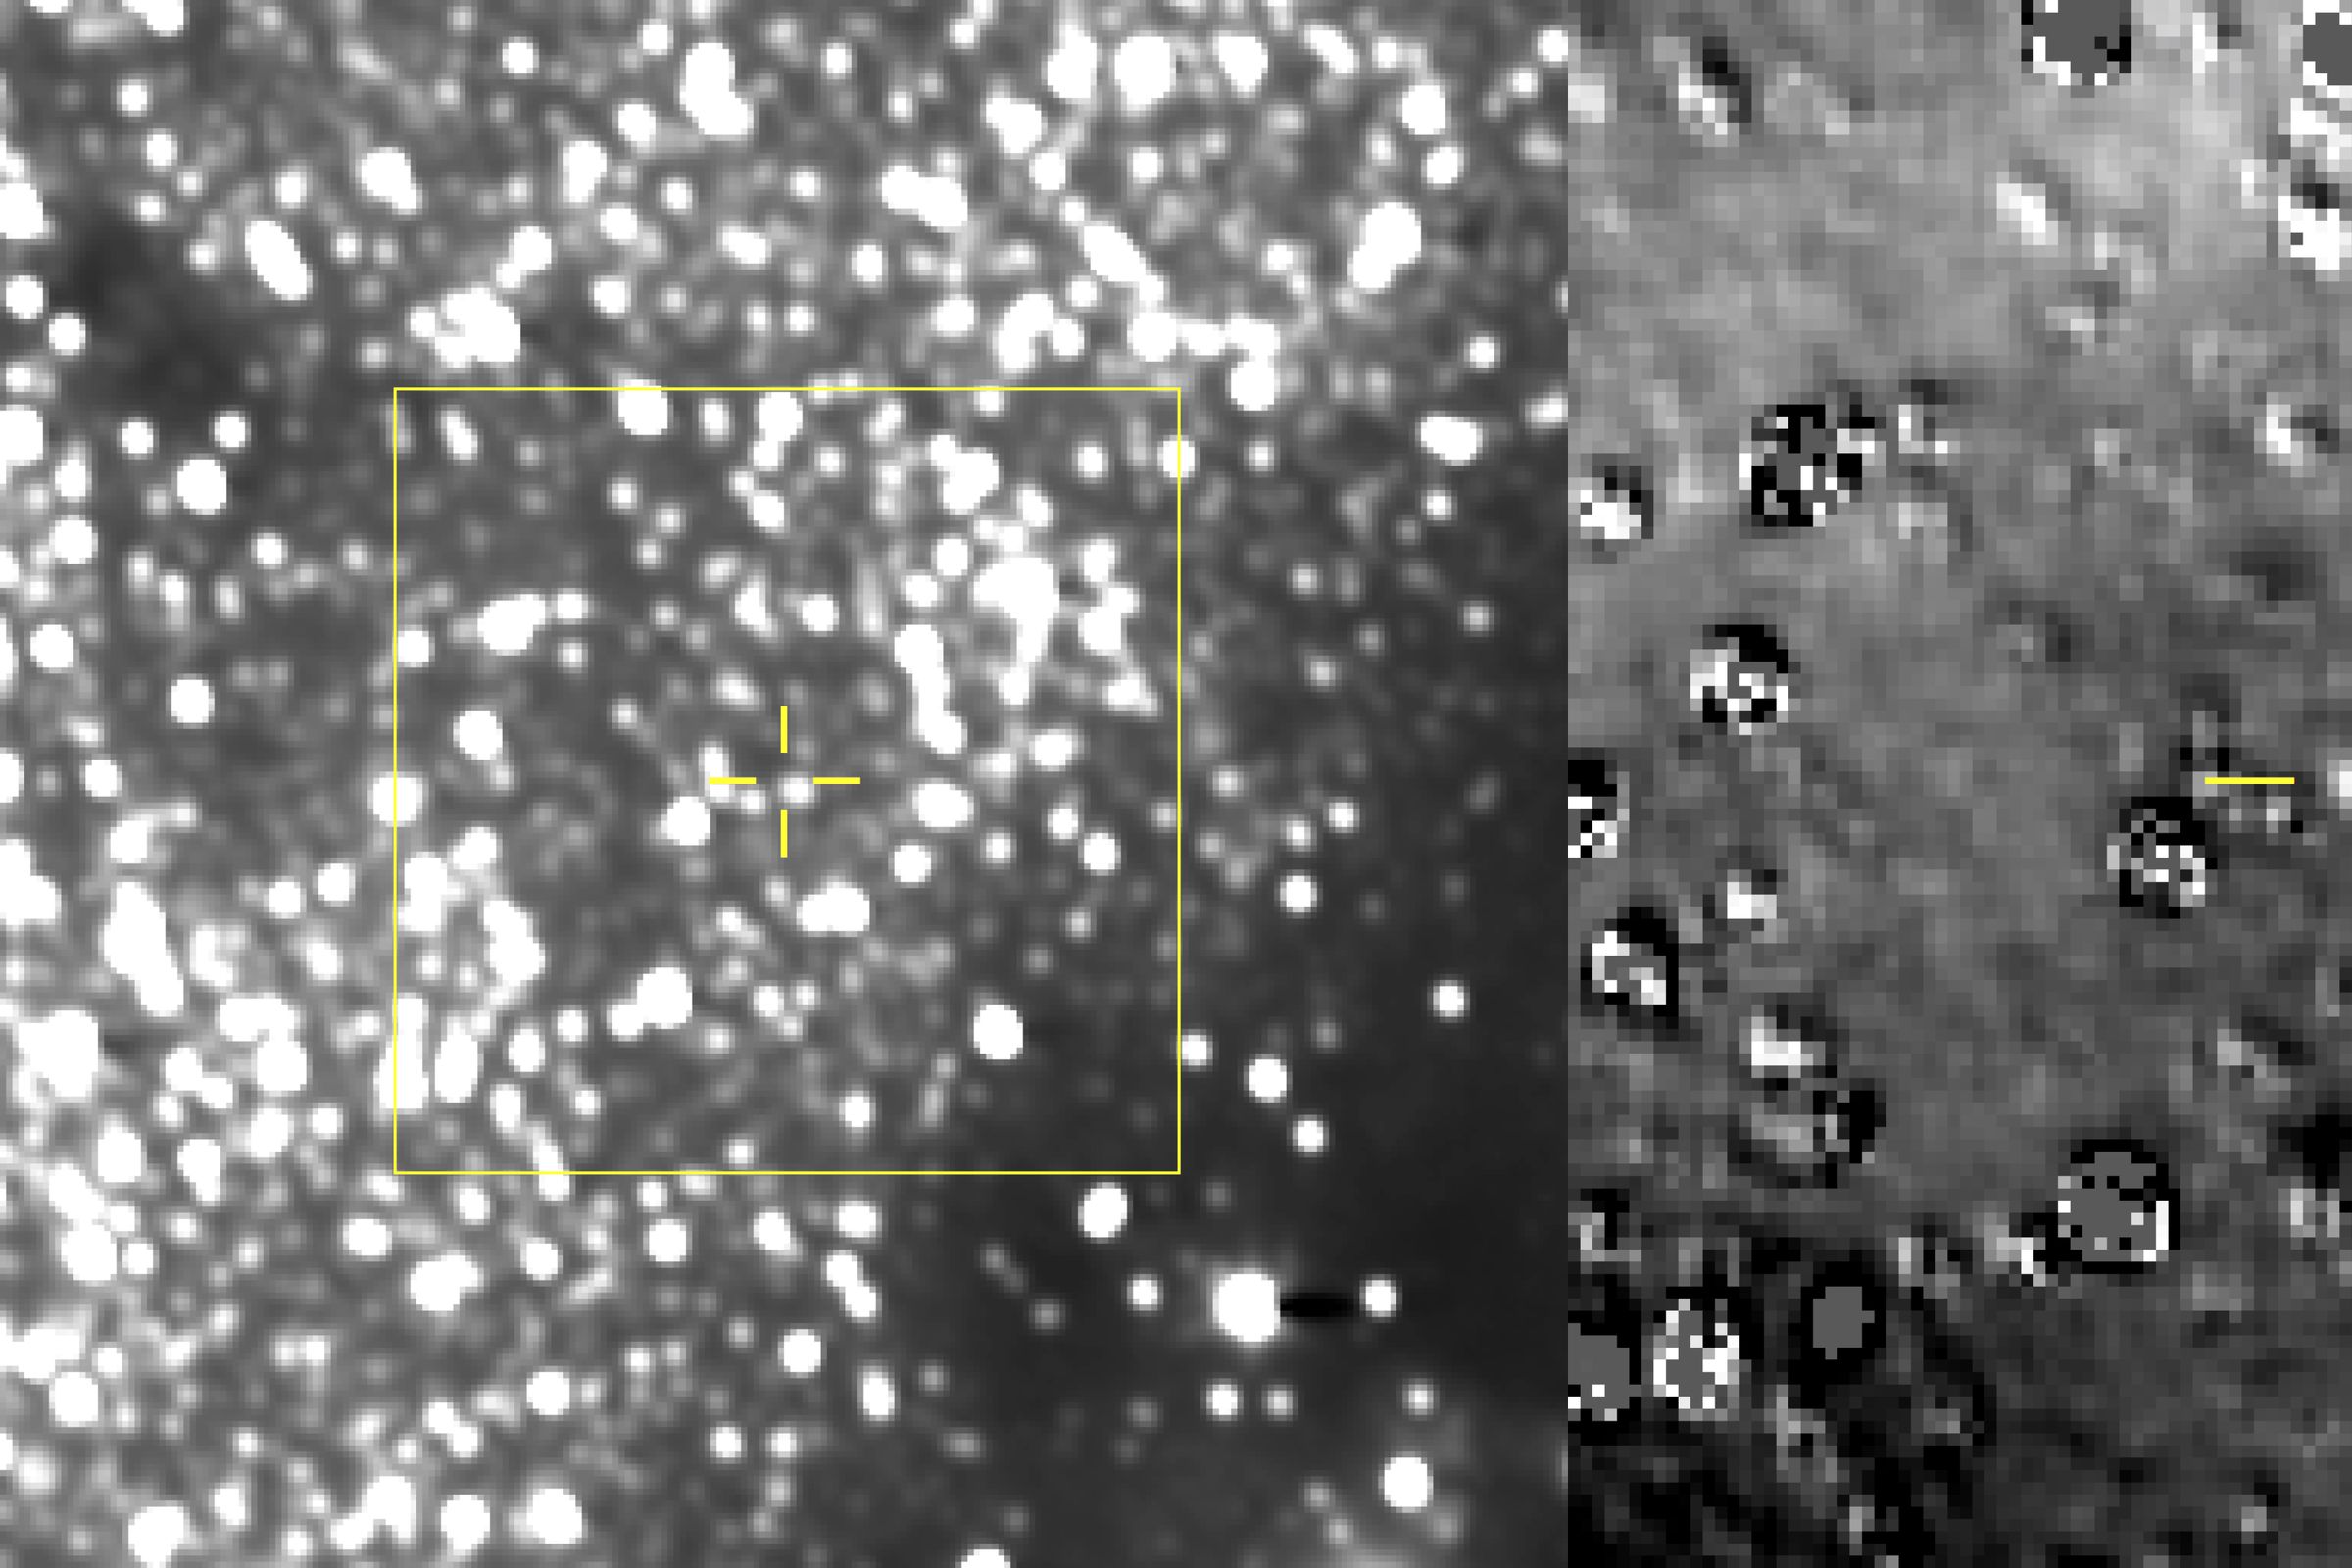 An image of Ultima Thule, taken by the New Horizons spacecraft on August 16th.